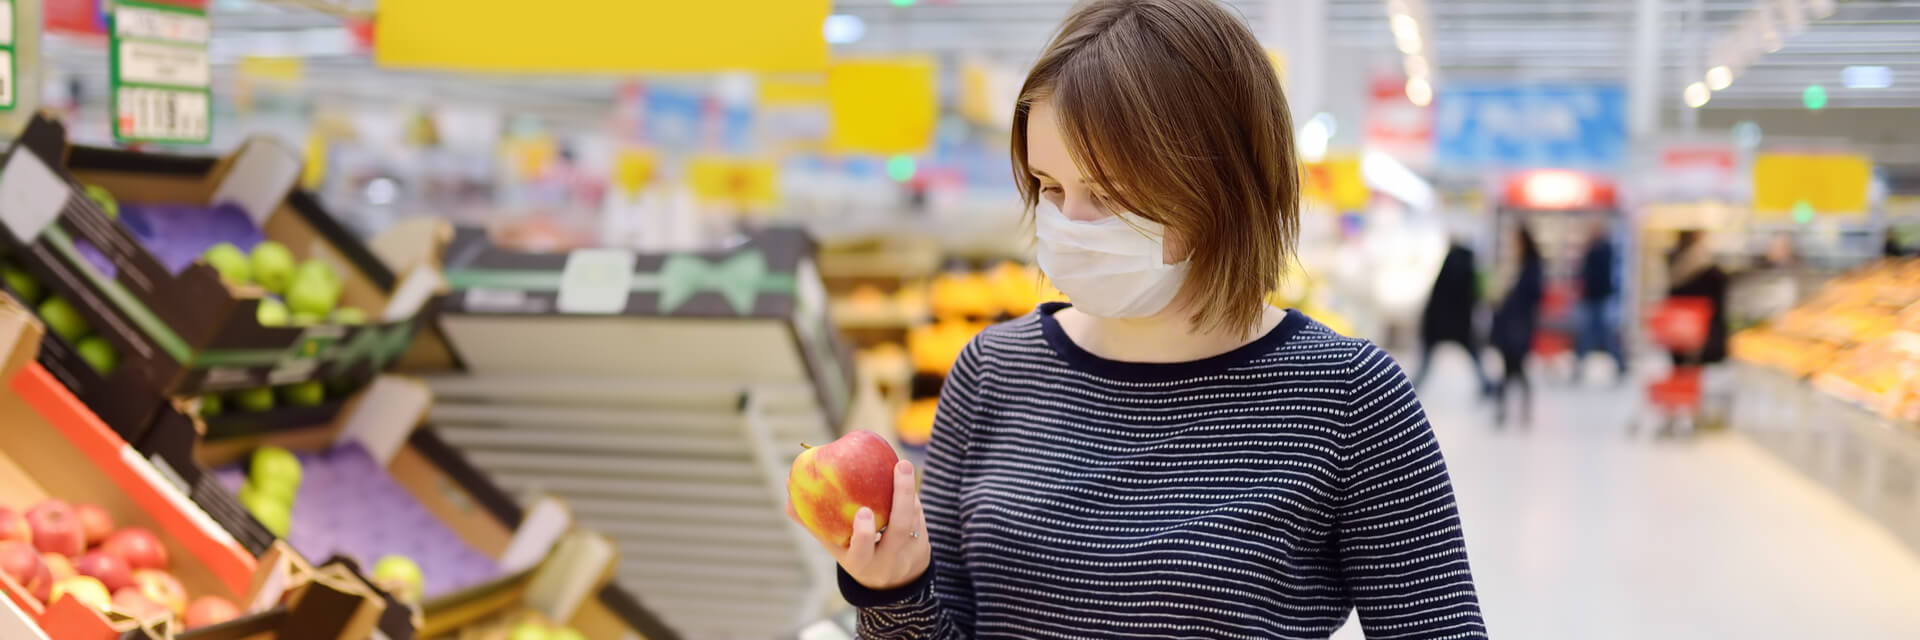 Lady in grocery store wearing a mask looking at an apple